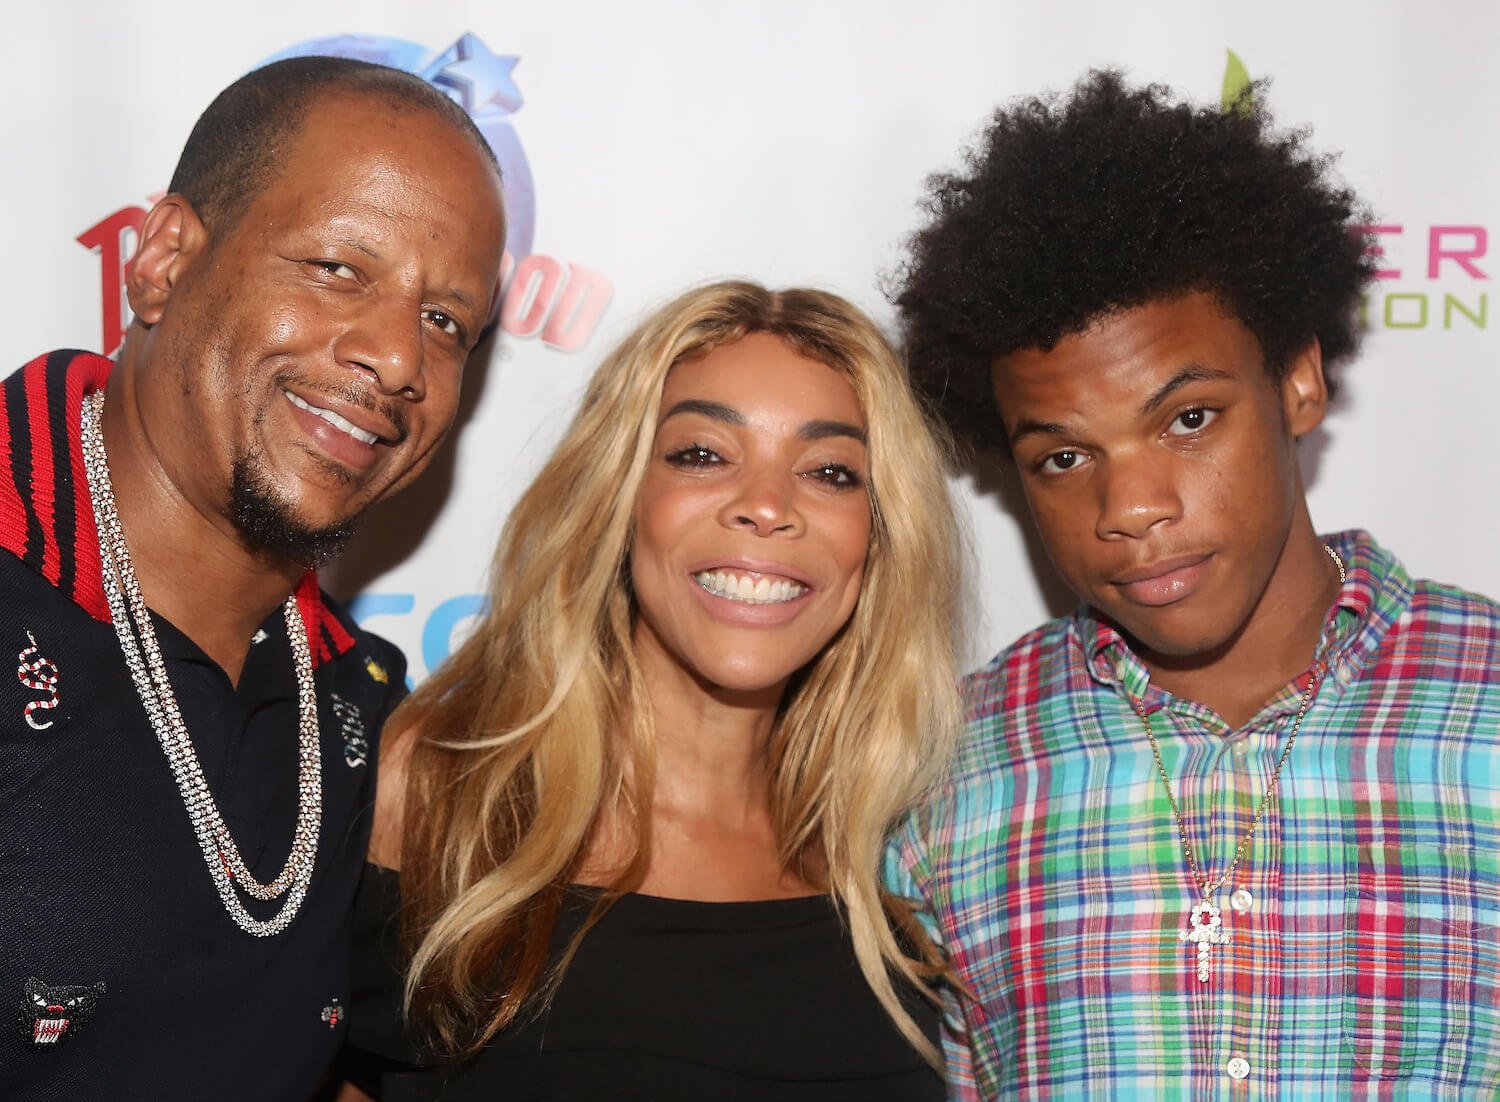 Kevin Hunter, Wendy Williams, and their son, Kevin Hunter Jr. posing and smiling together